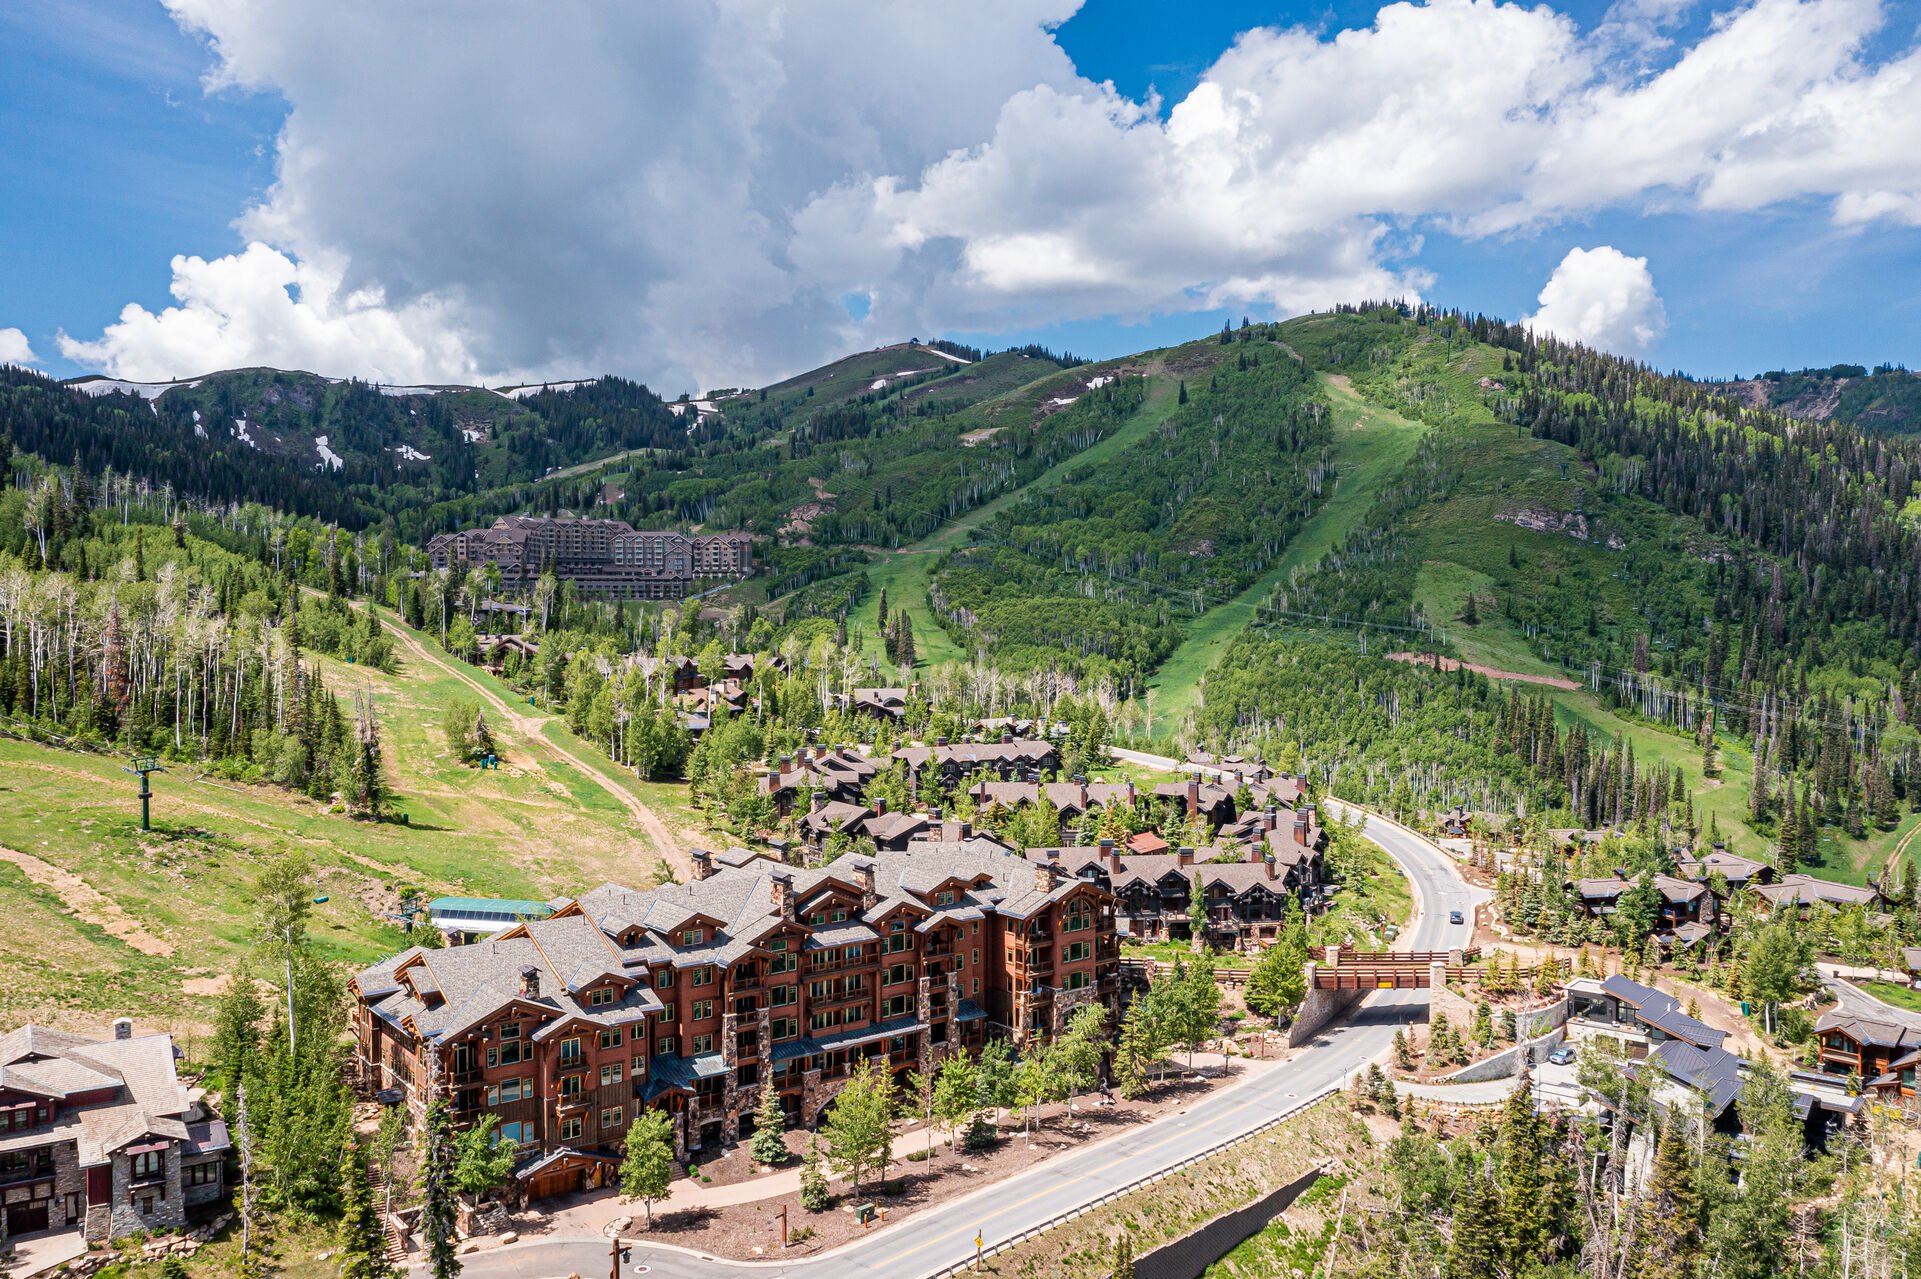 Situated on the slopes of Deer Valley Ski Resort